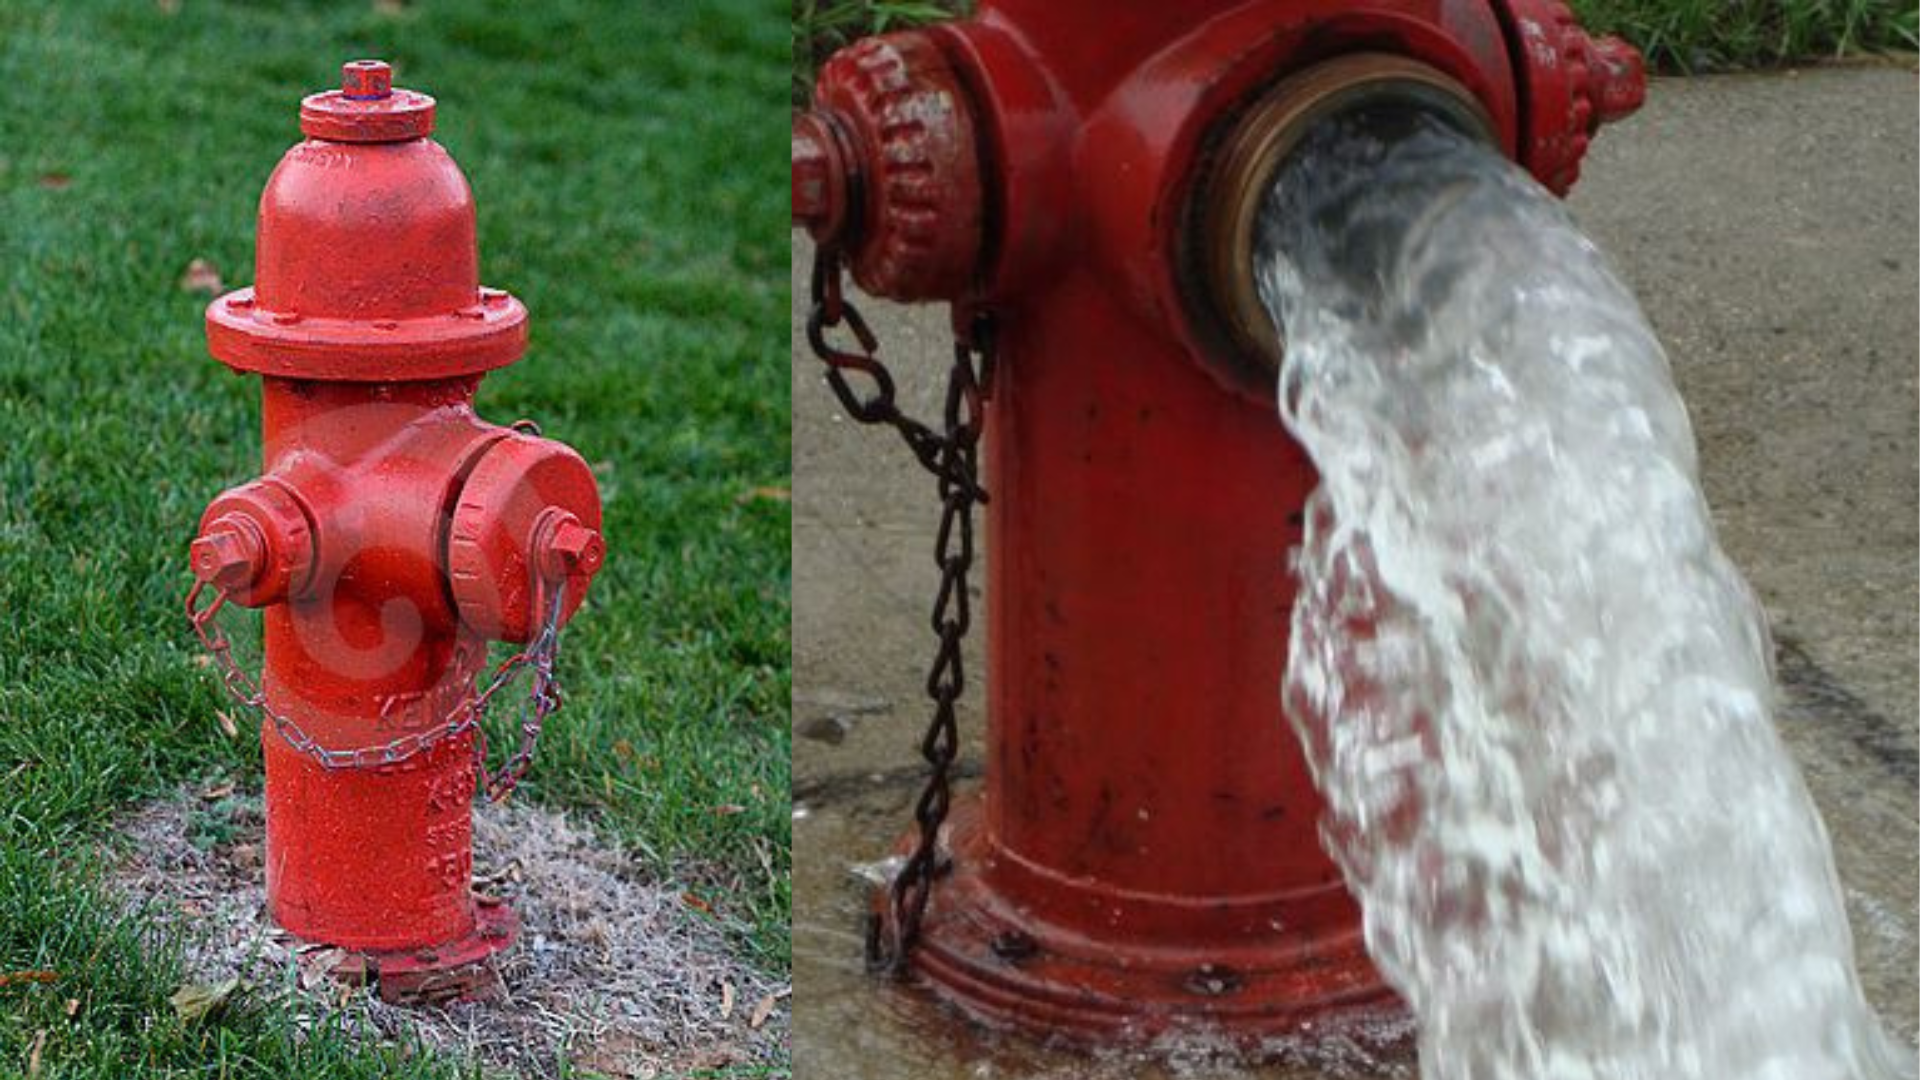 PWD Introduces Measures To Protect Chandni Chowk’s Fire Hydrants From Theft And Vandalism